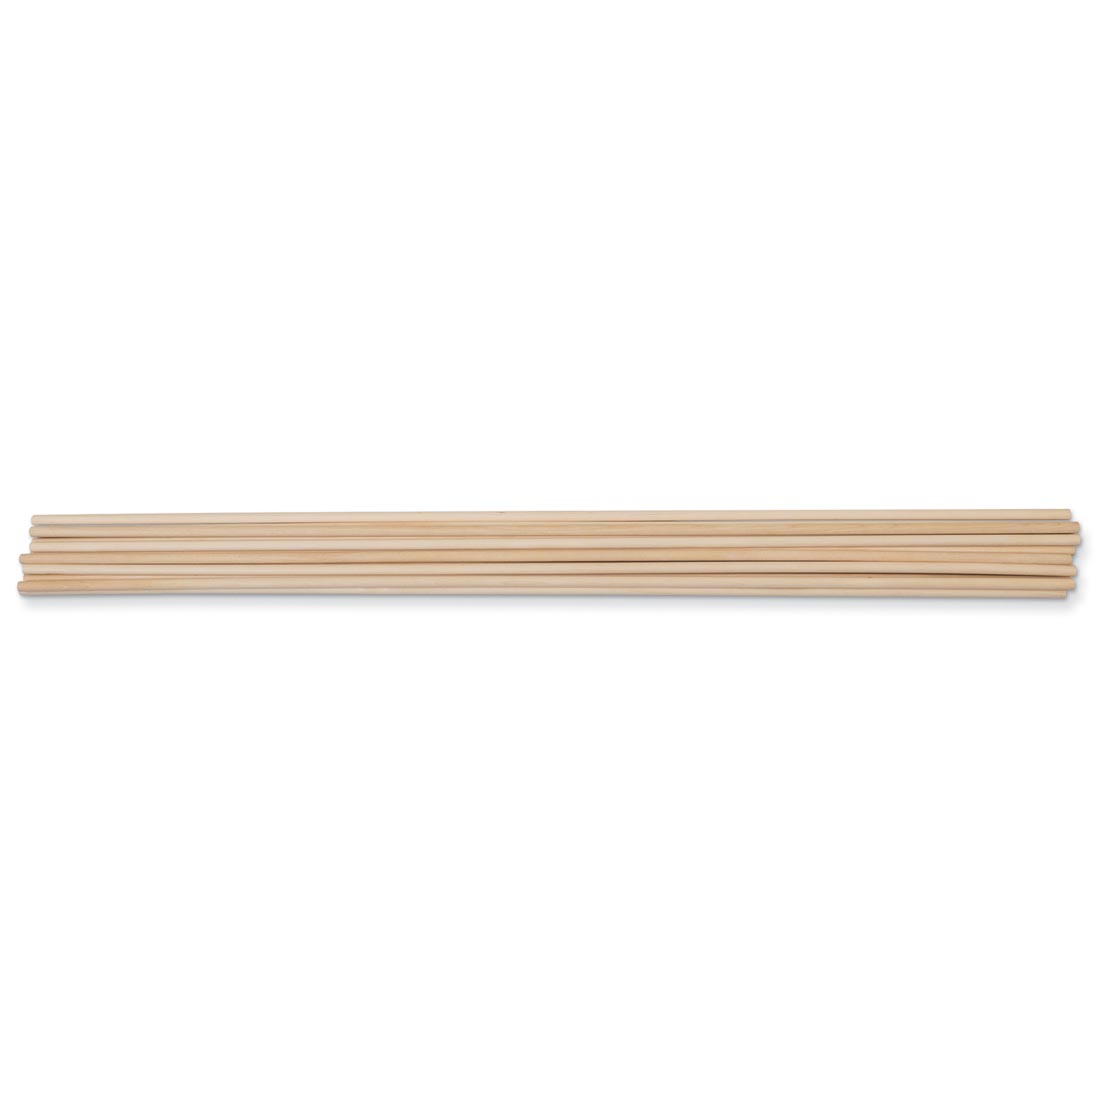 Creativity Street 36" long by 3/8" Diameter natural Wooden Dowels, 12-count